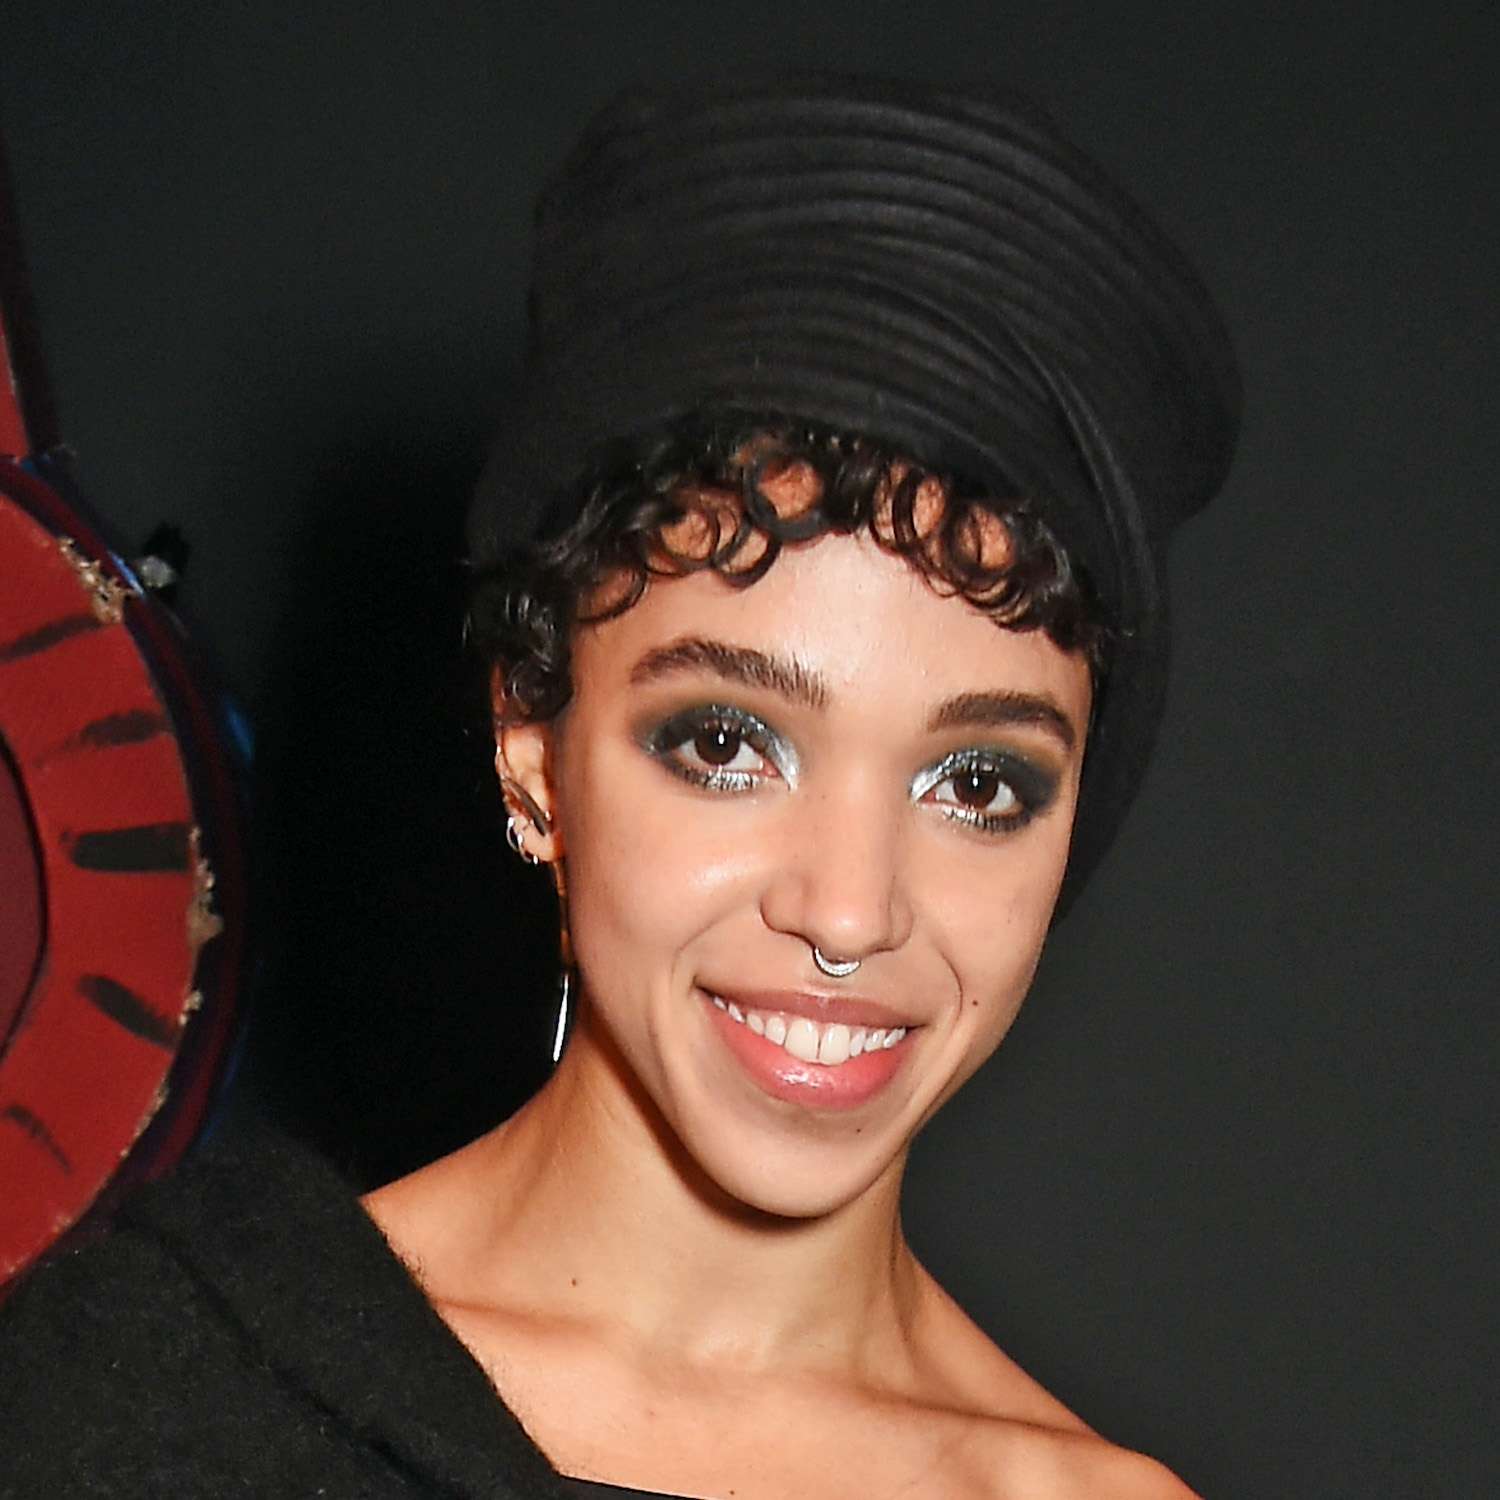 FKA Twigs wears a cropped haircut with pin-curled baby bangs and a hat